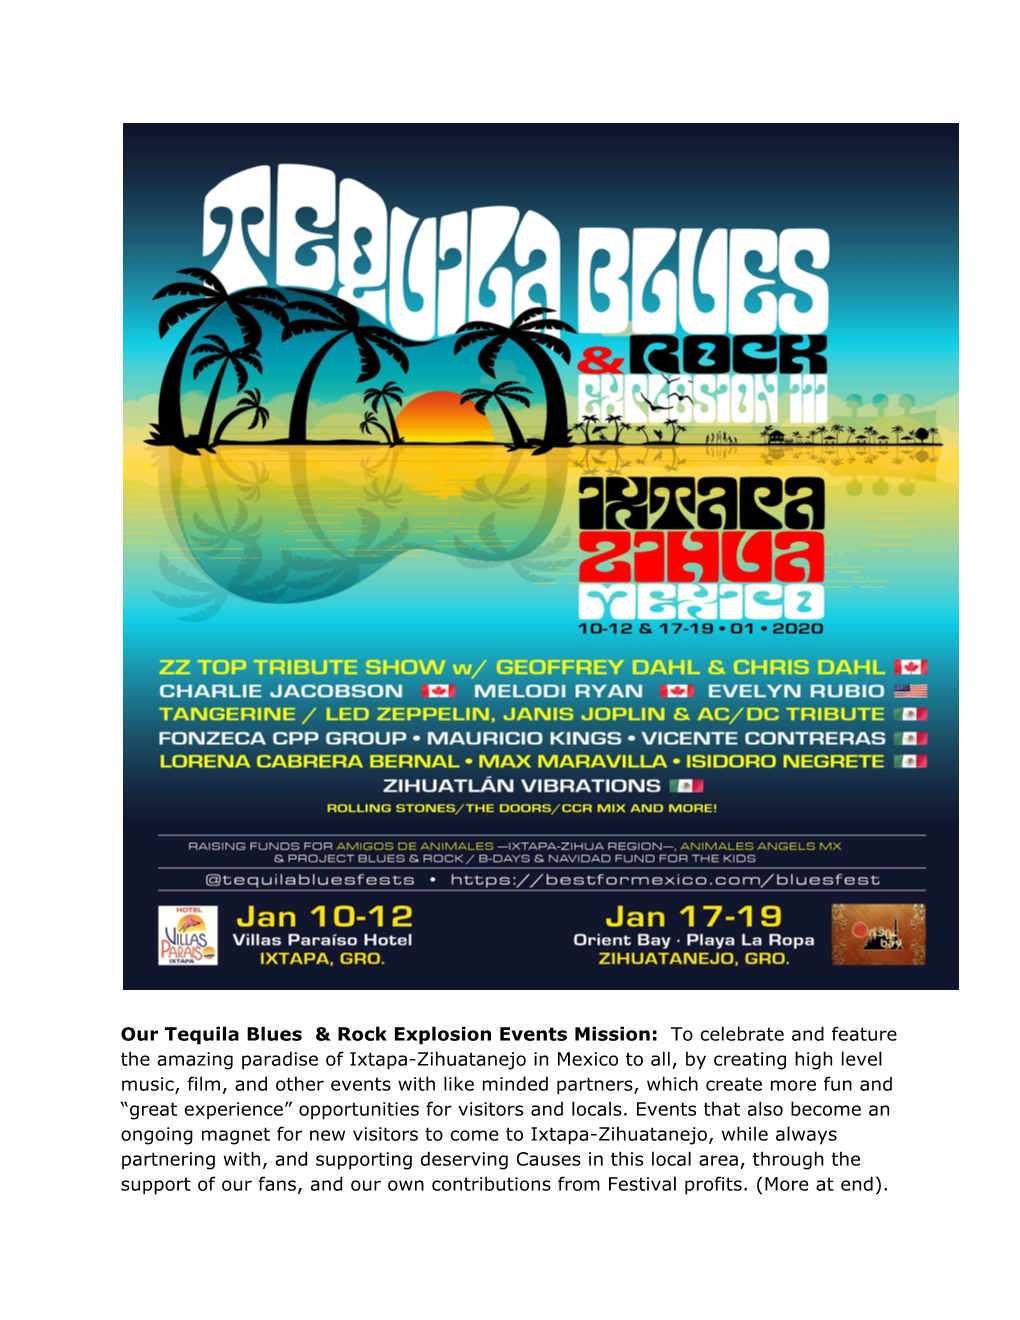 Our Tequila Blues & Rock Explosion Events Mission: to Celebrate And